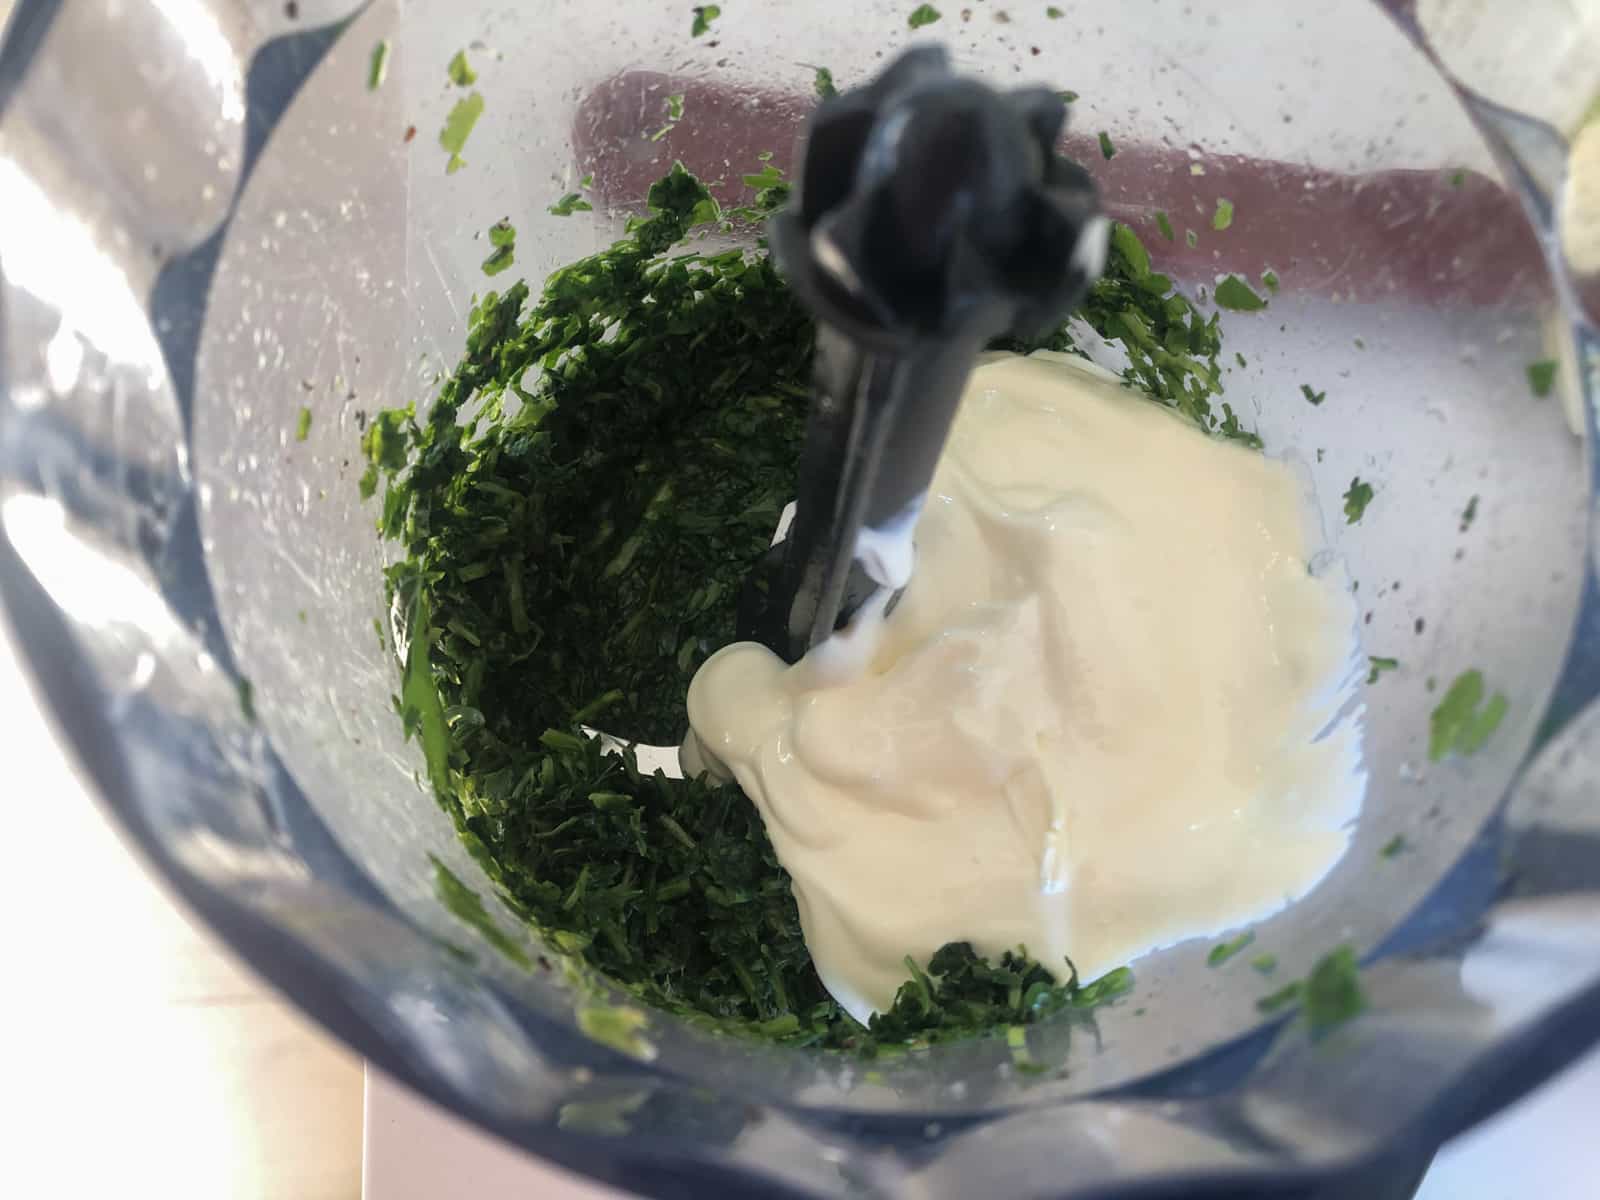 Herbs and yogurt in a small hand blender to make a dressing